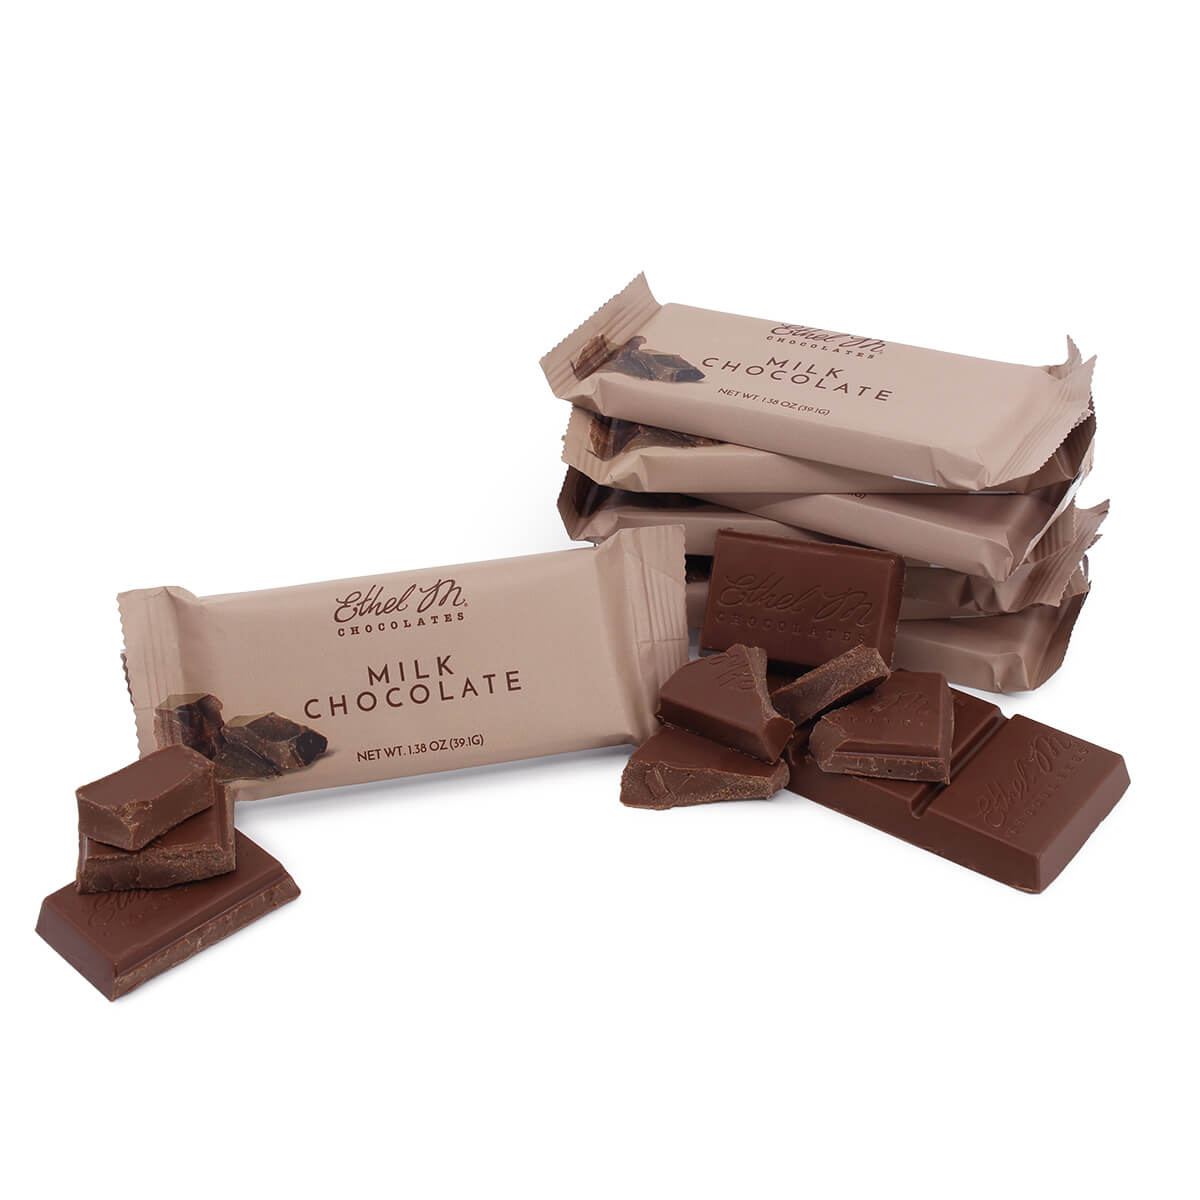 Delight on our Rich, Premium Ethel M Milk Chocolate Bar. It can be purchased individually, in a set of 8, or in box of 24.